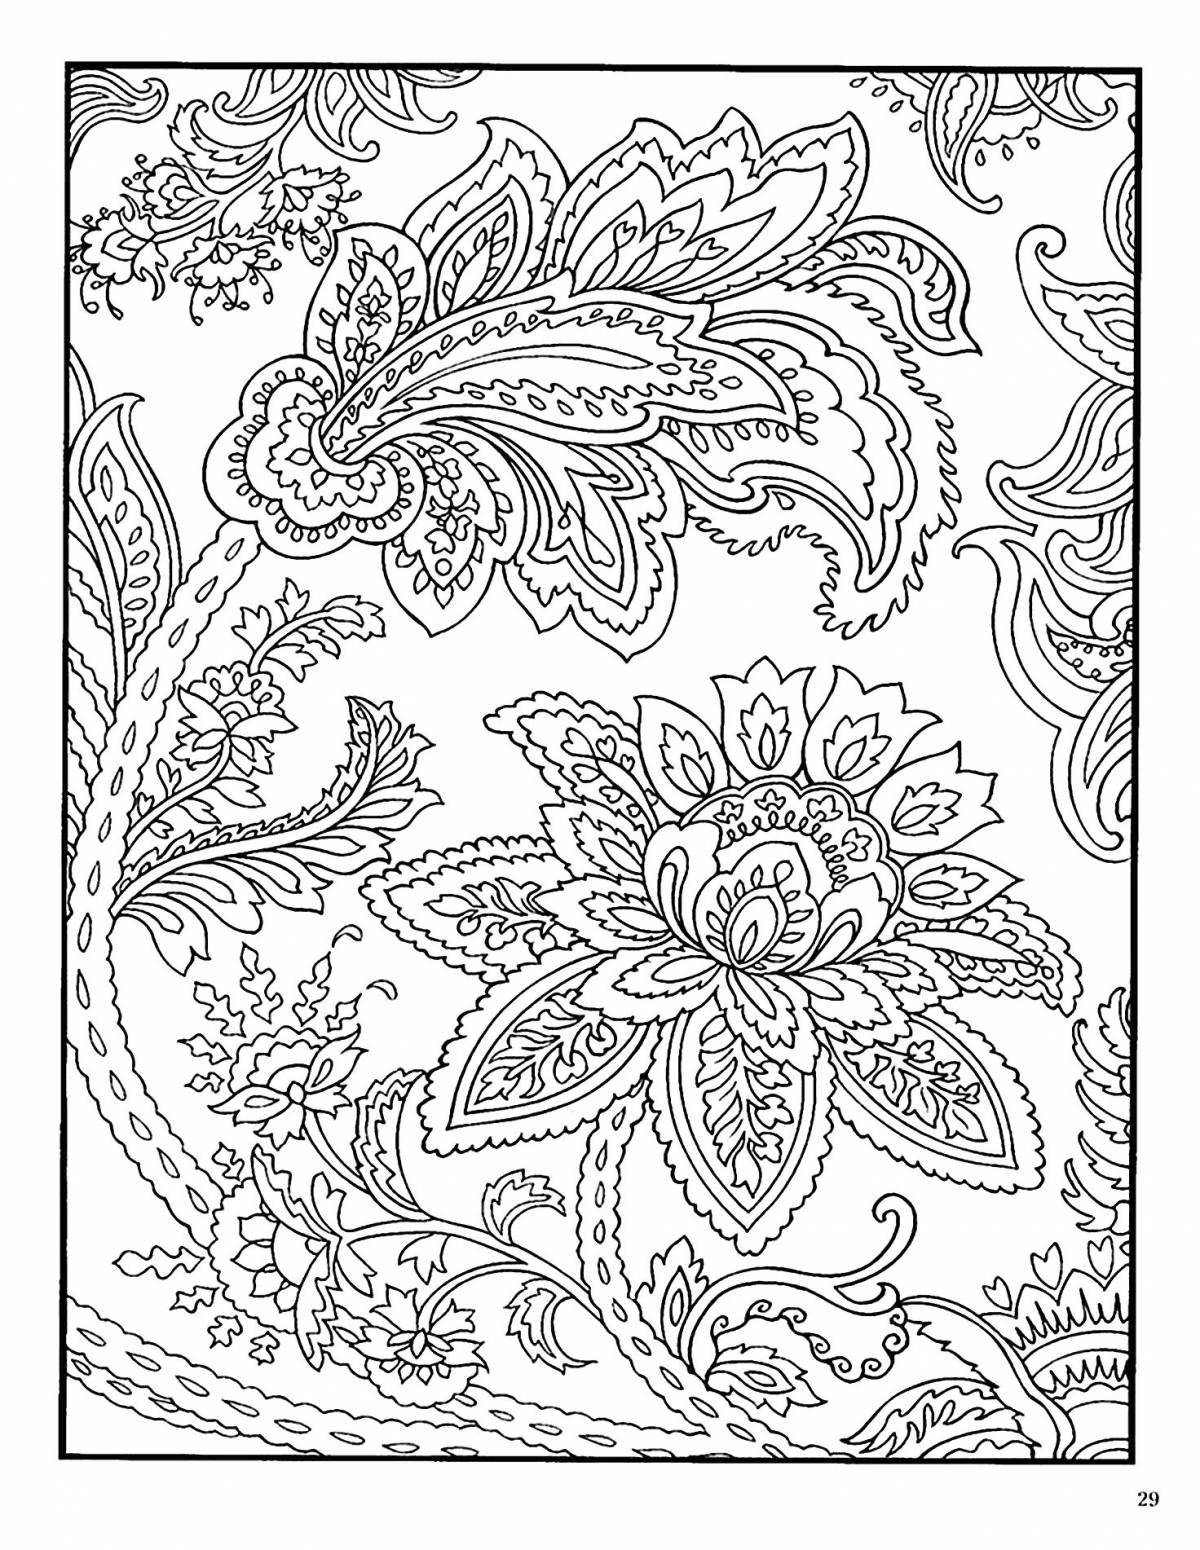 Playful nerve coloring page